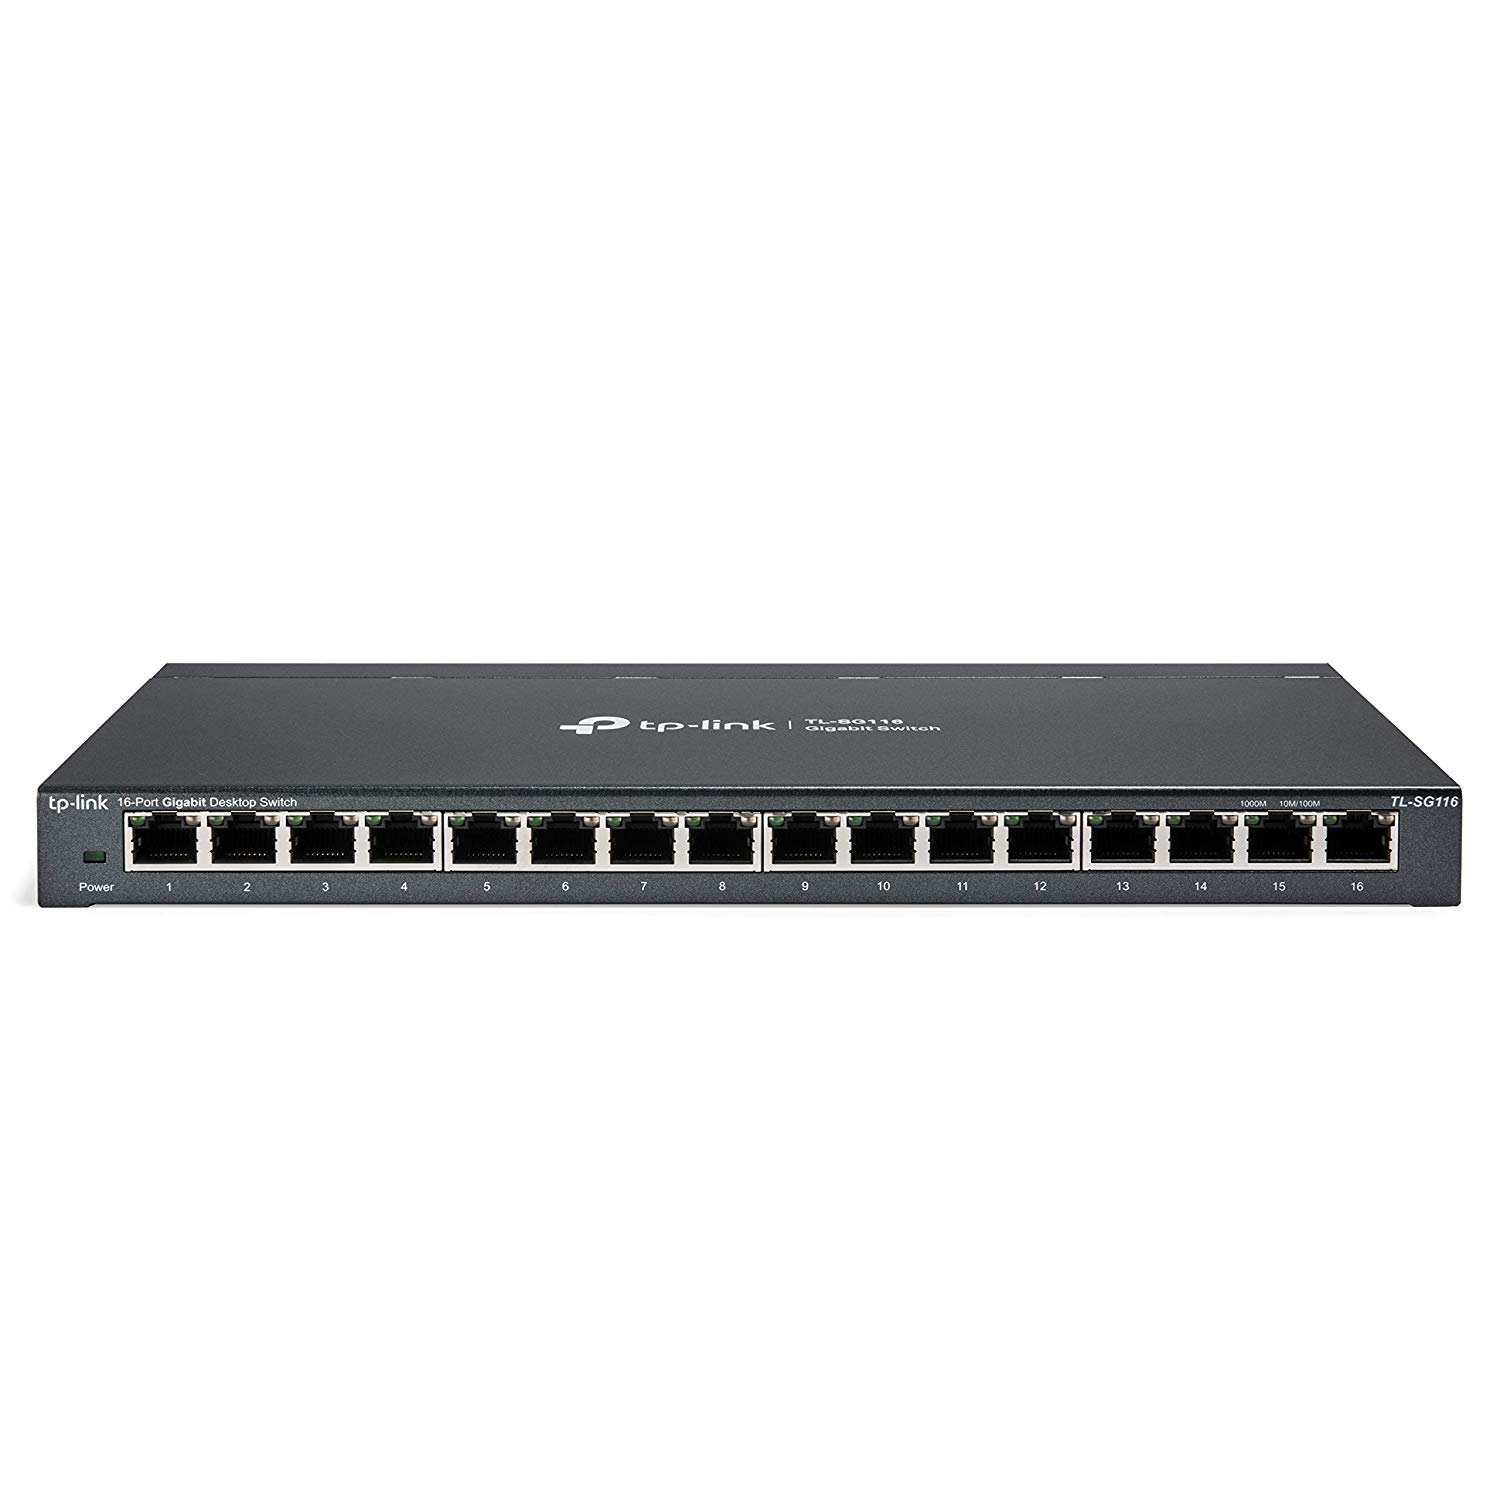 TP-LINK 16 Port Switch Gigabits Network switch